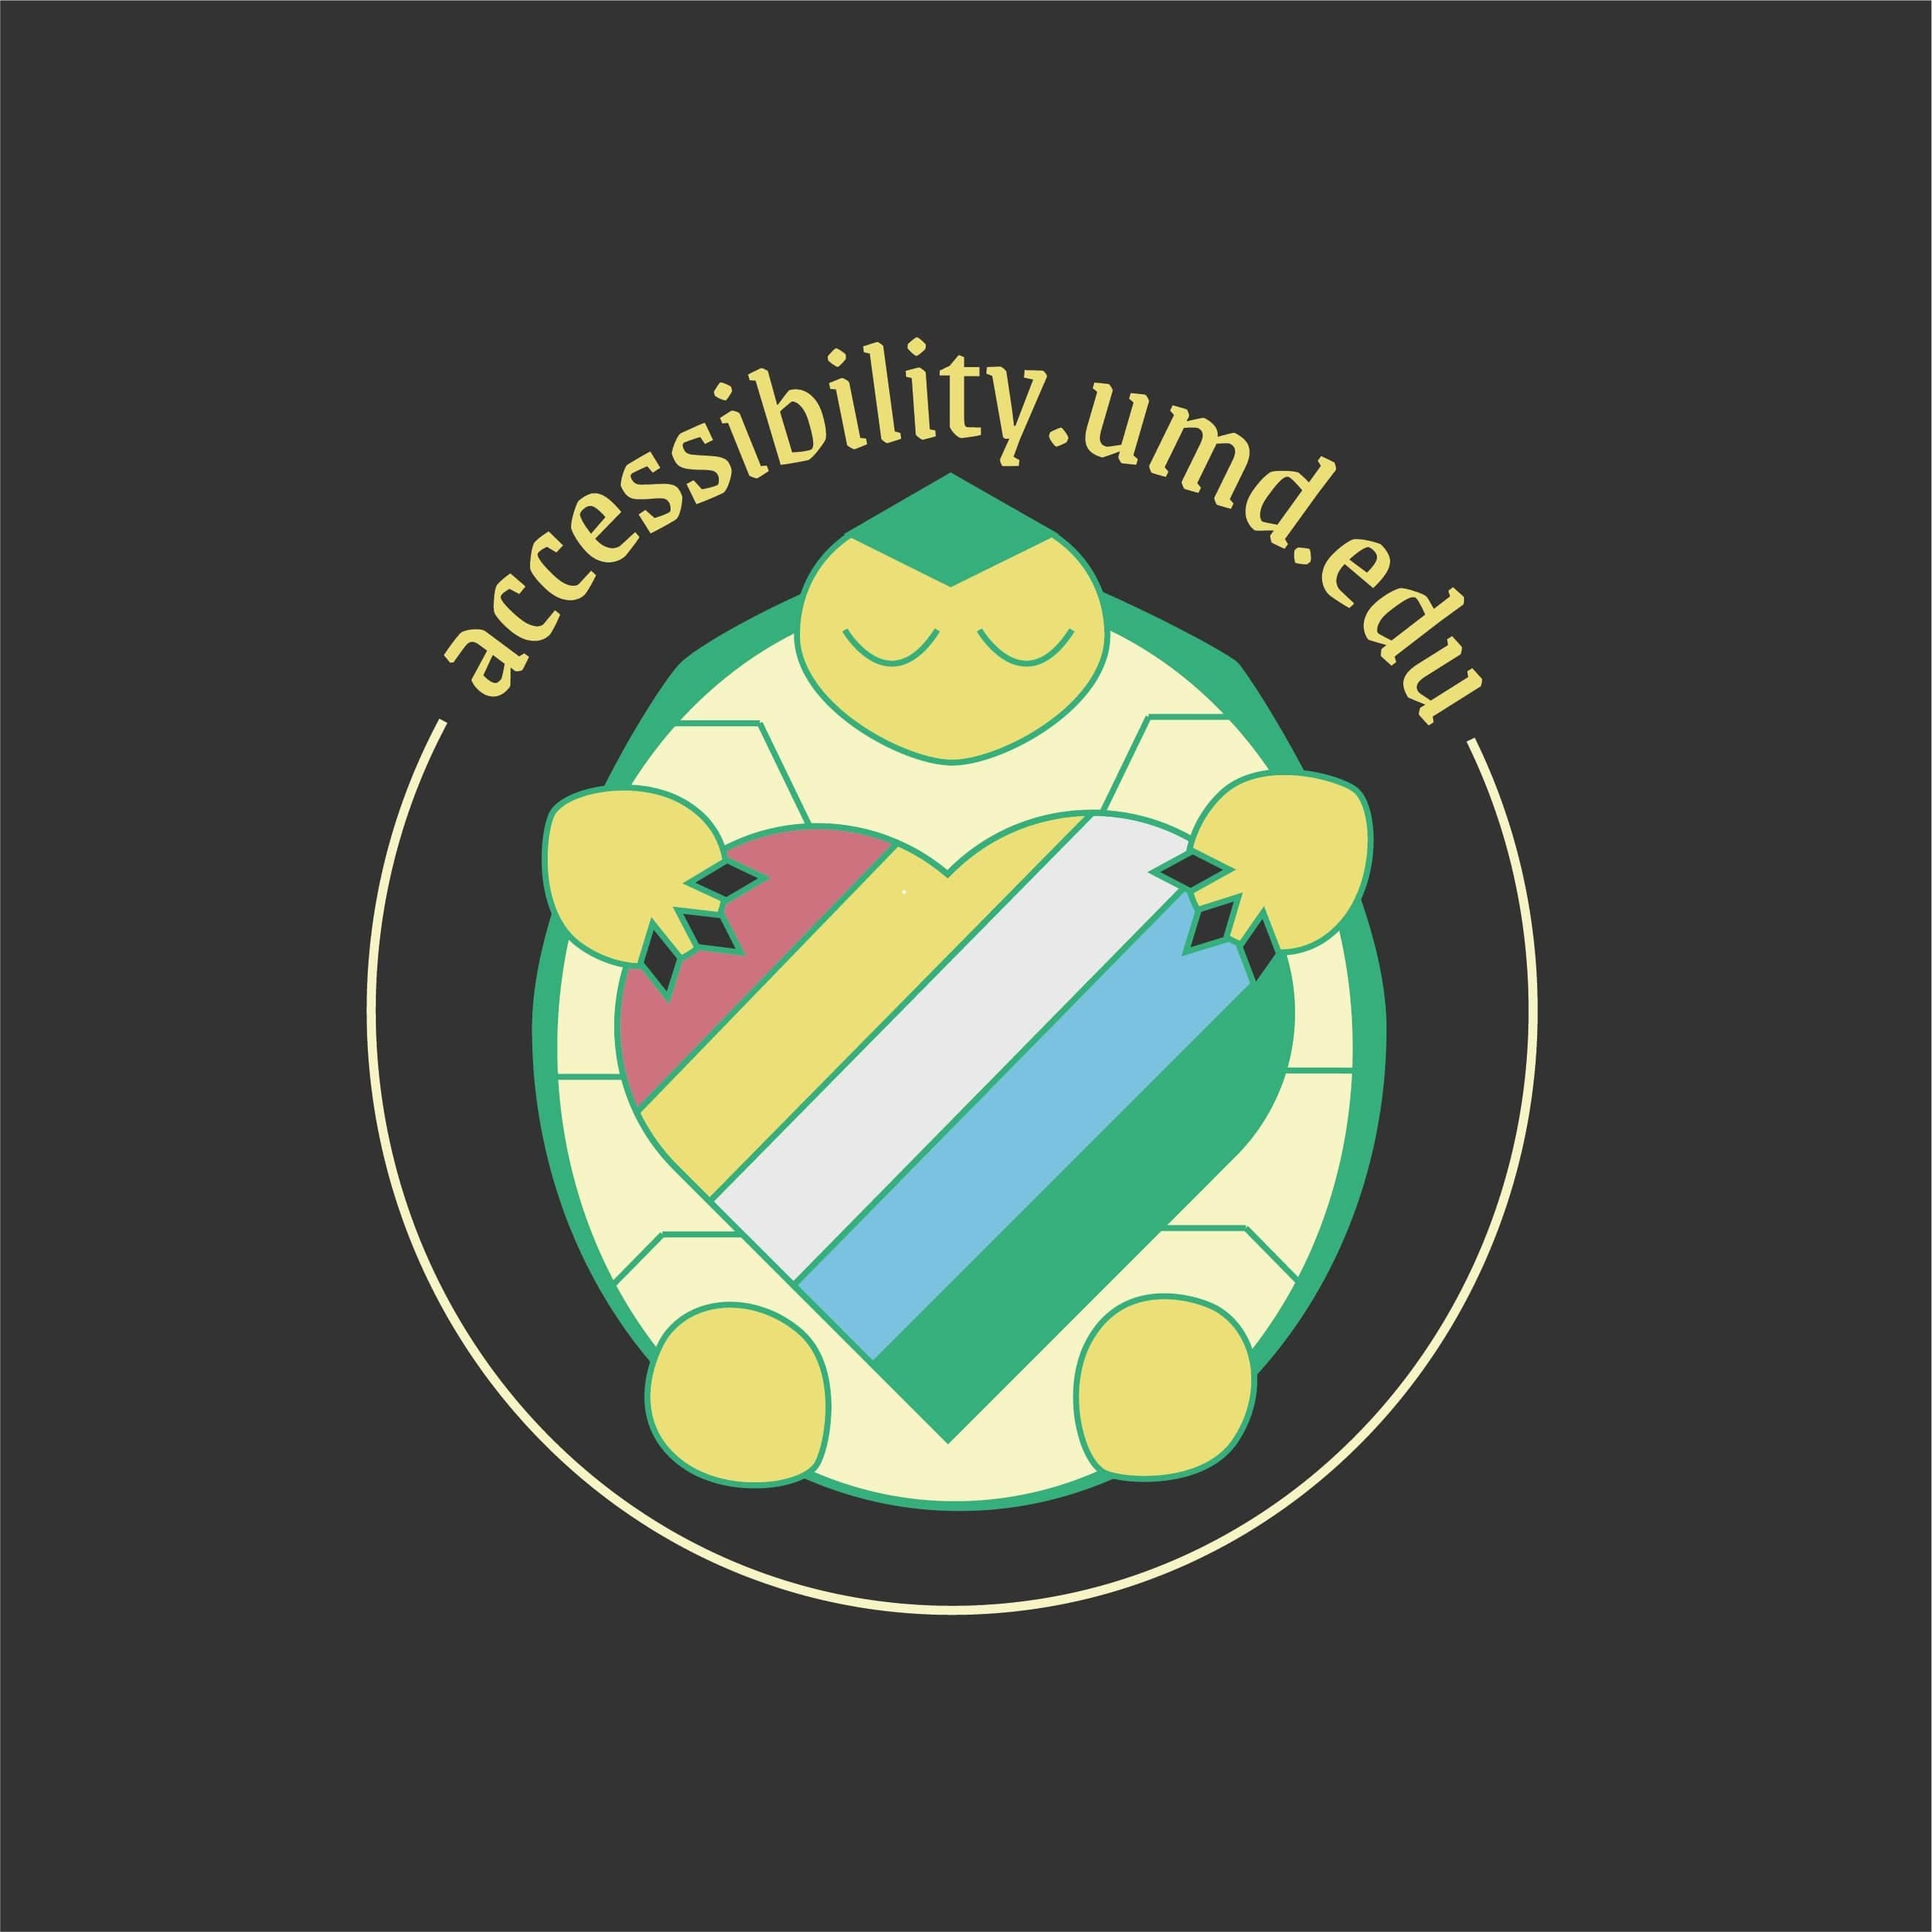 The UMD Accessibility Terp, designed by Sam diBella, represents the UMD disability community. It features the disability pride flag colors inside a heart held by the front paws of a turtle. The turtle is on a dark grey background and inside a circle which includes the URL "accessibility.umd.edu"